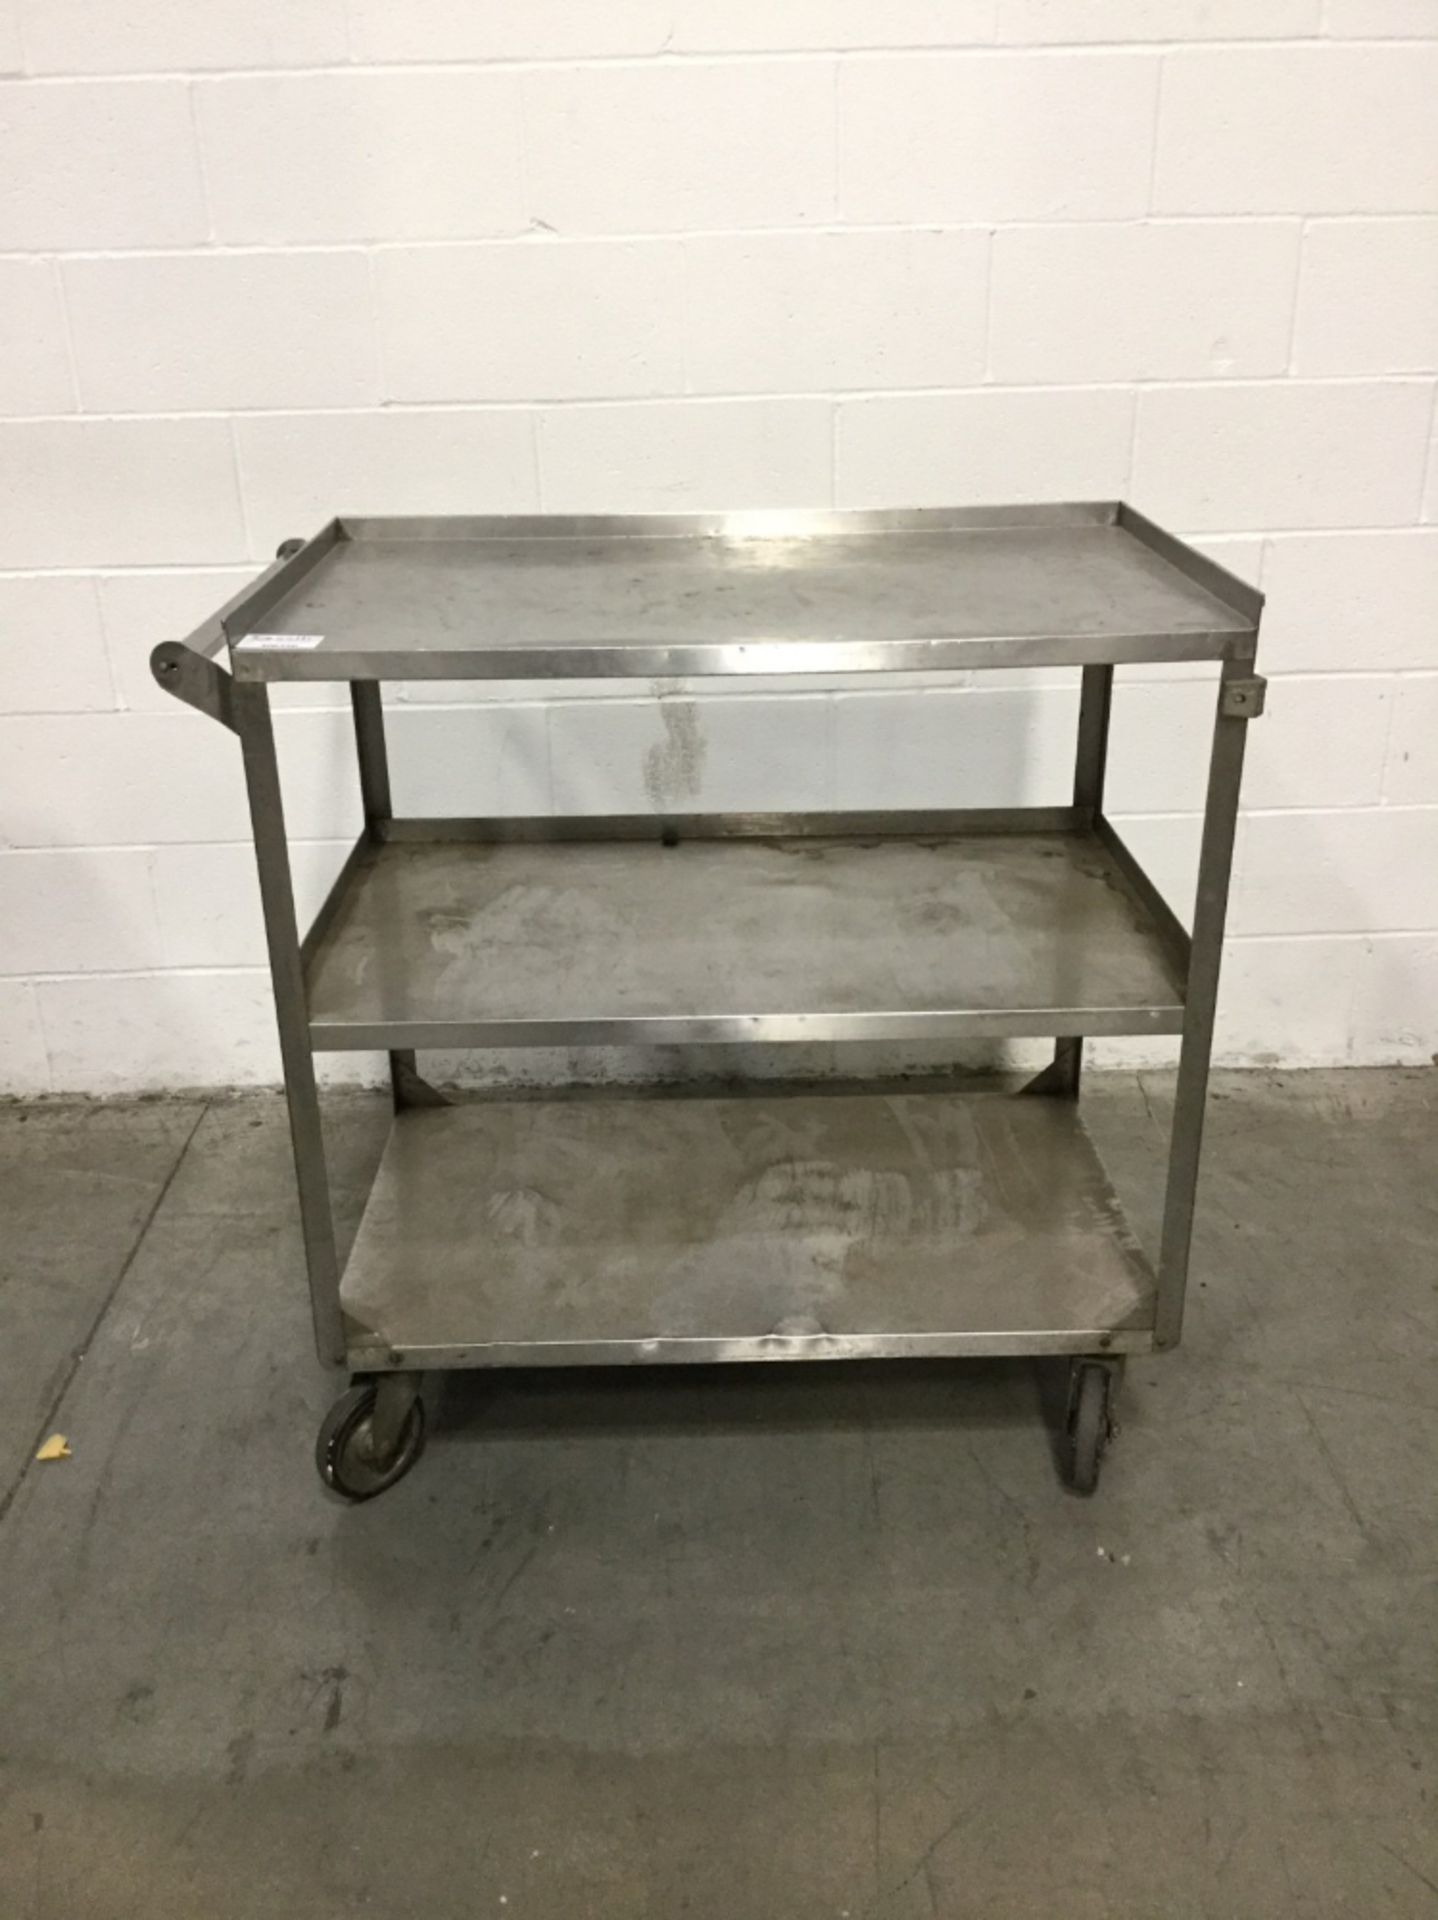 (1) Lakeside 3 Tier Stainless Steel Cart